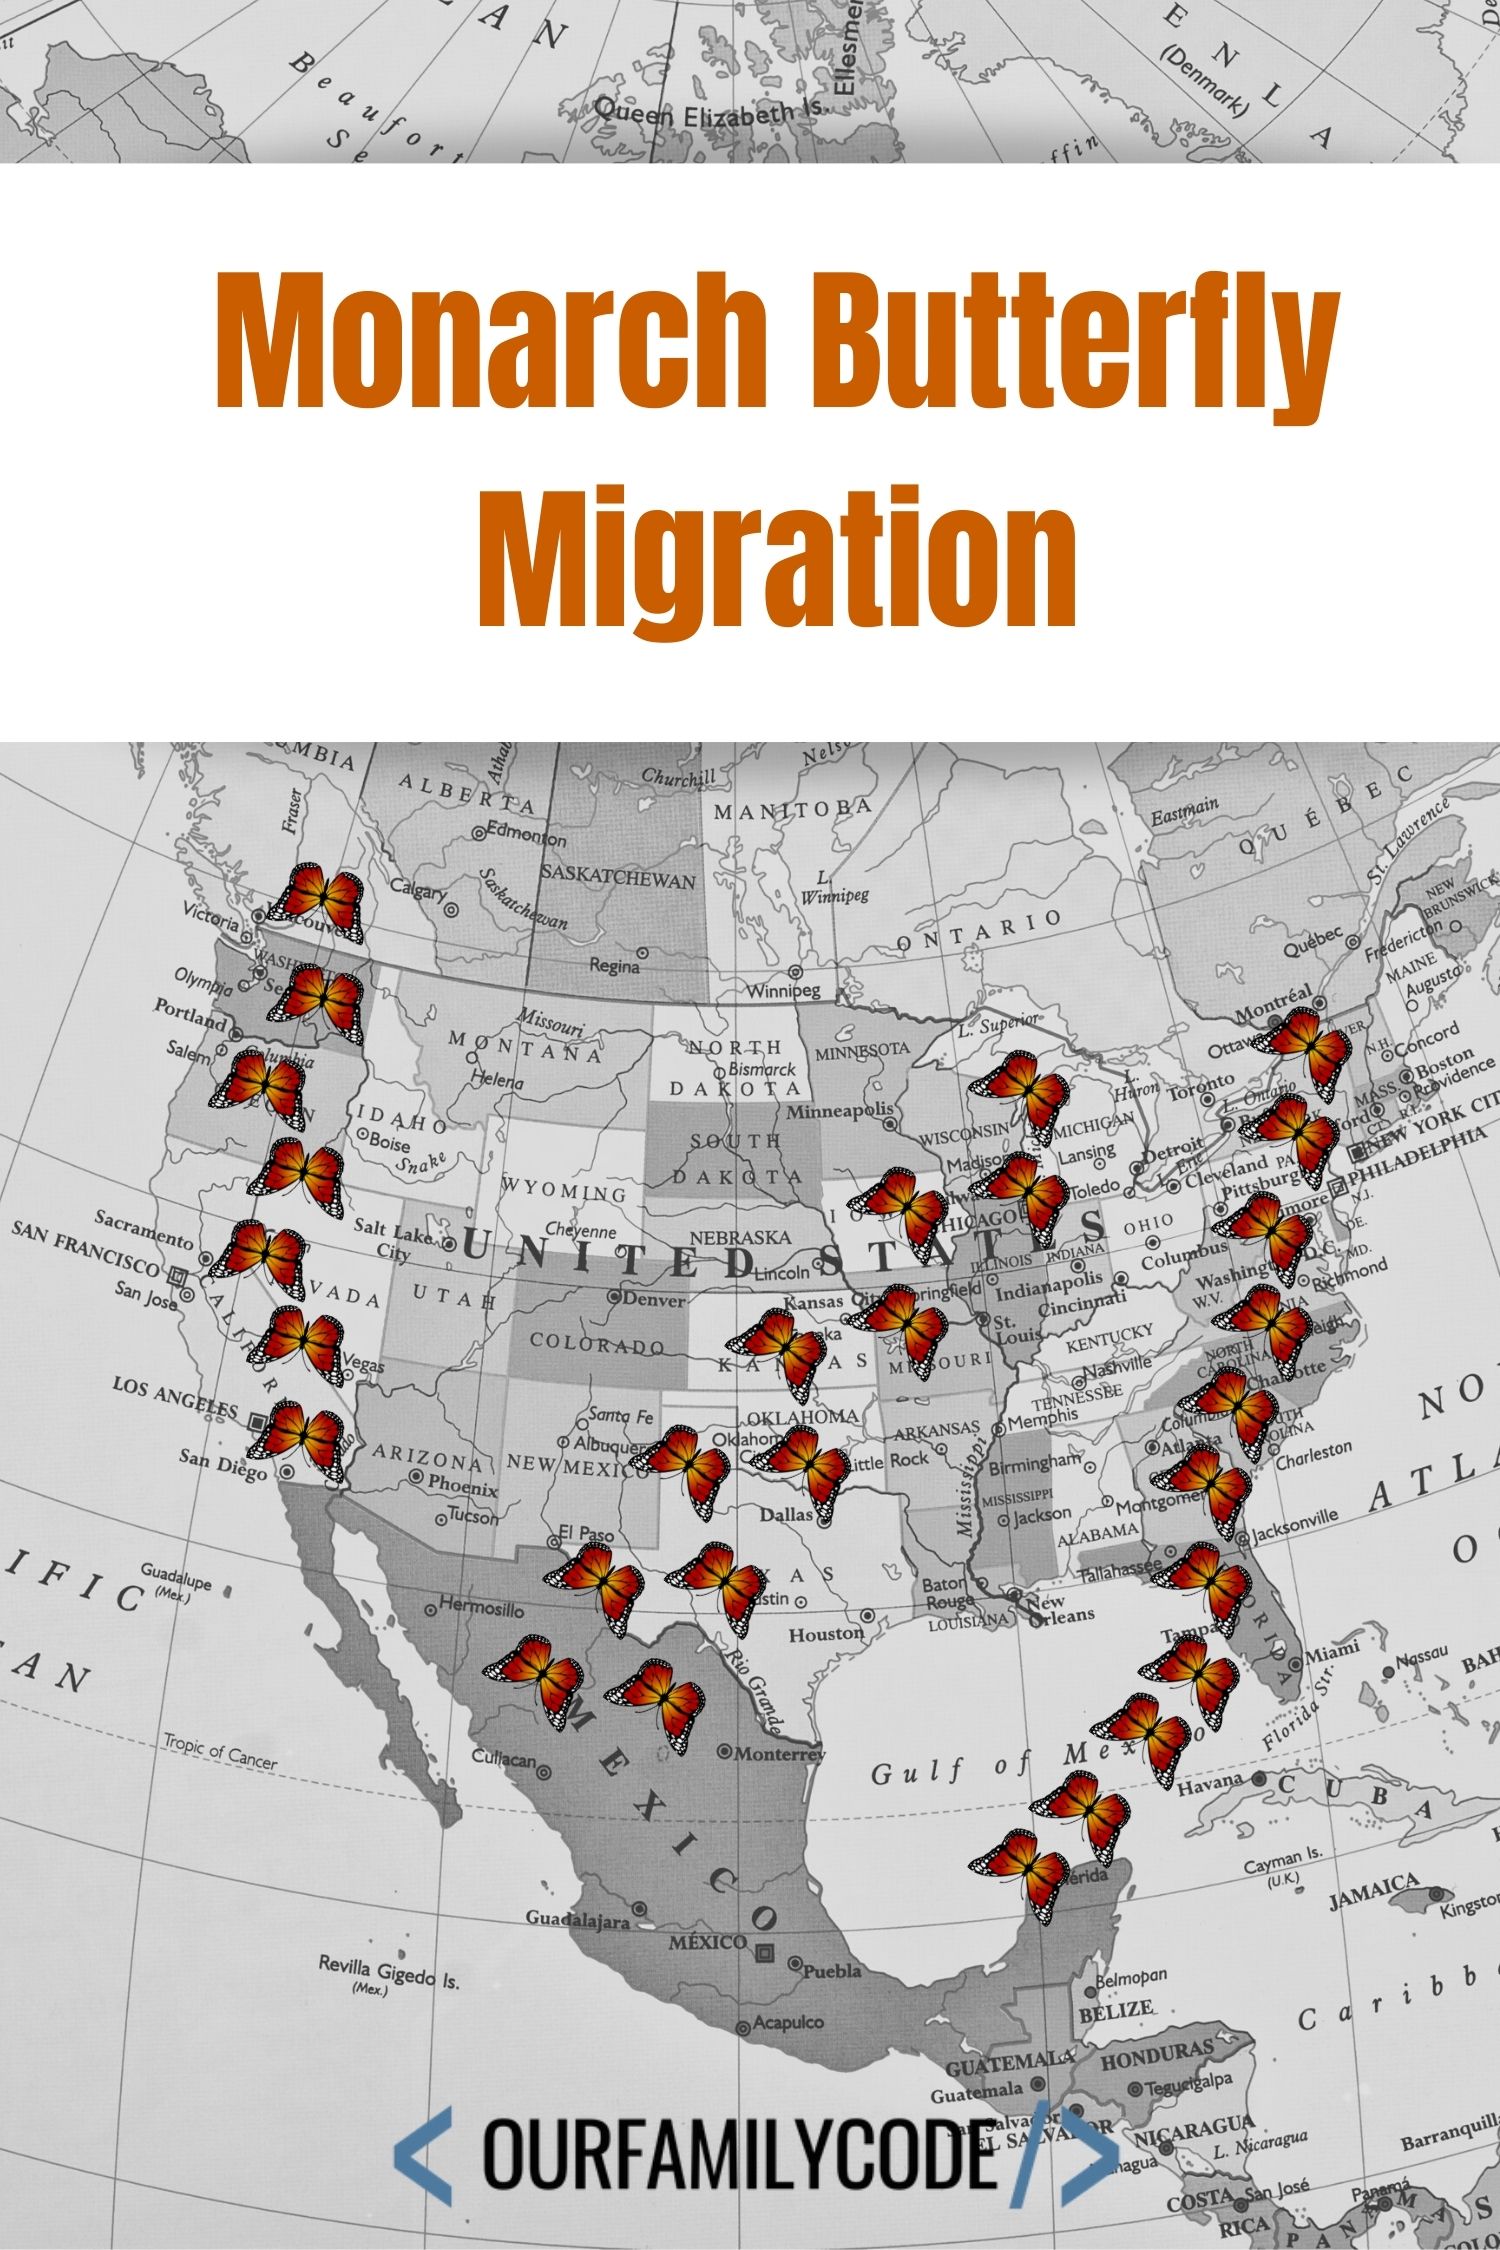 A picture that shows the paths of monarch butterflies during migration.